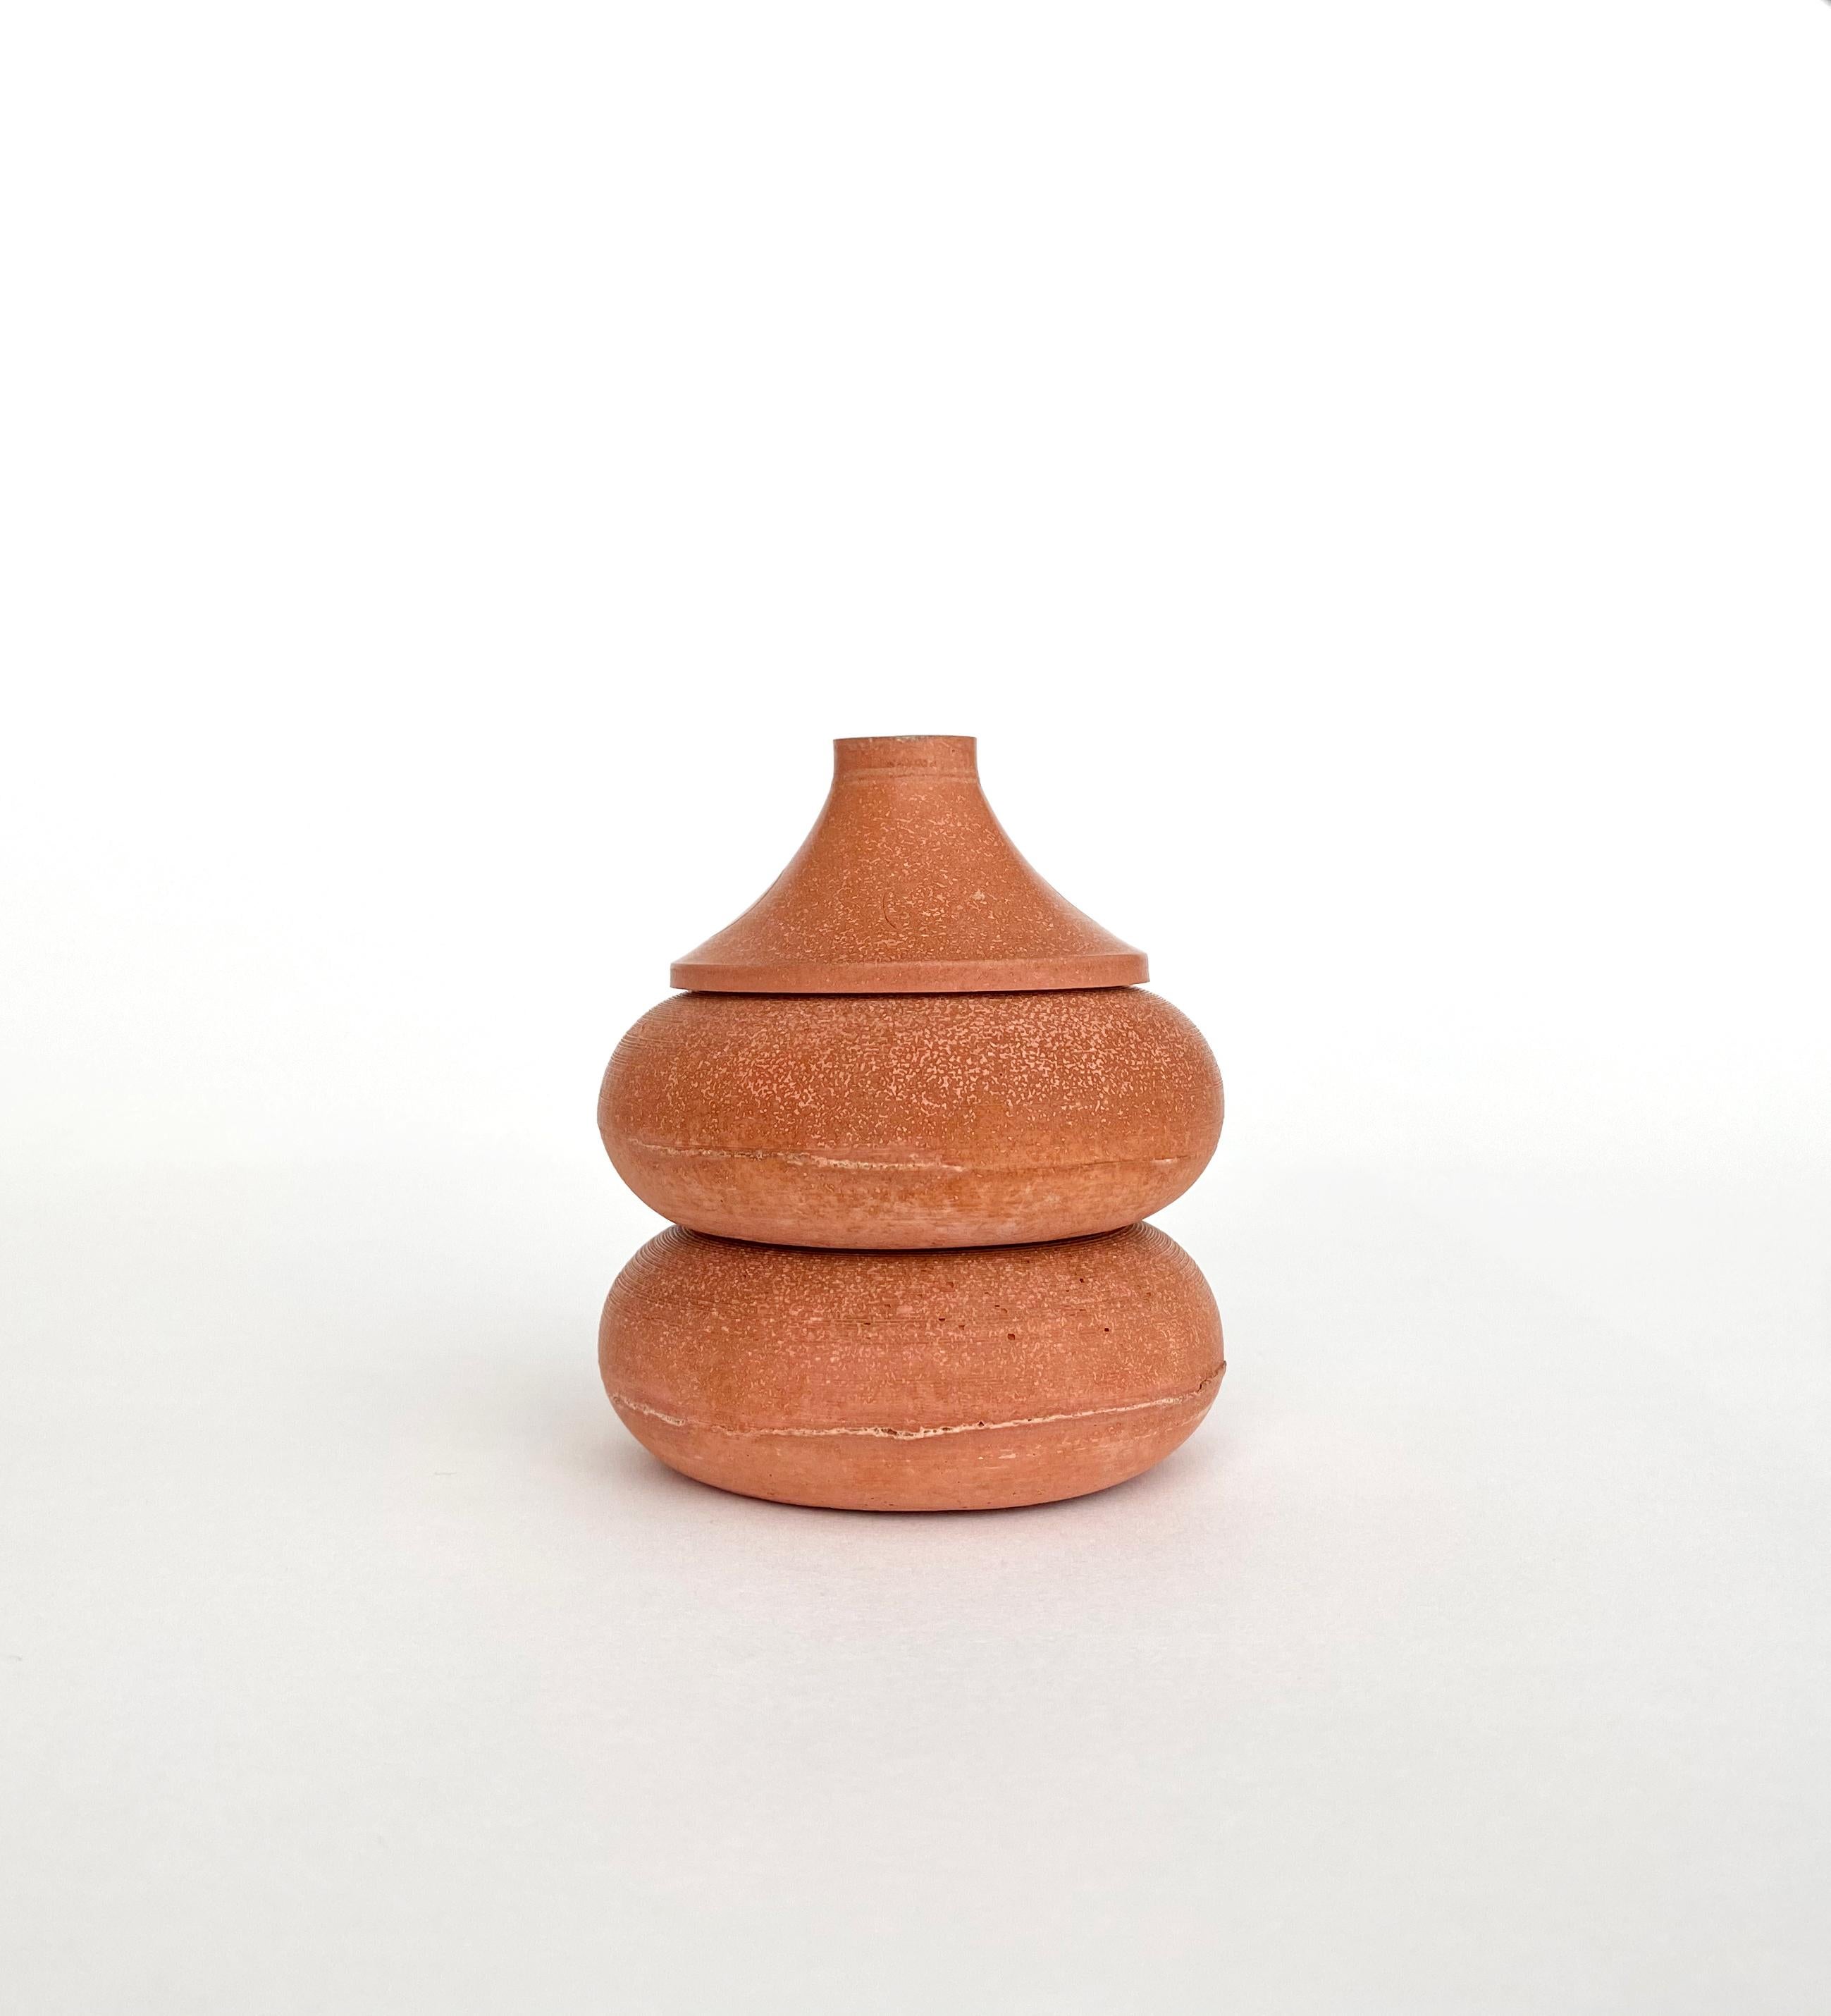 Nomad jar pebble tower by Gilles & Cecilie
Unique
Dimensions: H 8 x W 6 cm
Material: terracotta with iron

Gilles and Cecilie Studio created the Nomad Jar Family to explore drawing in three dimensions. The series of objects that can stand alone